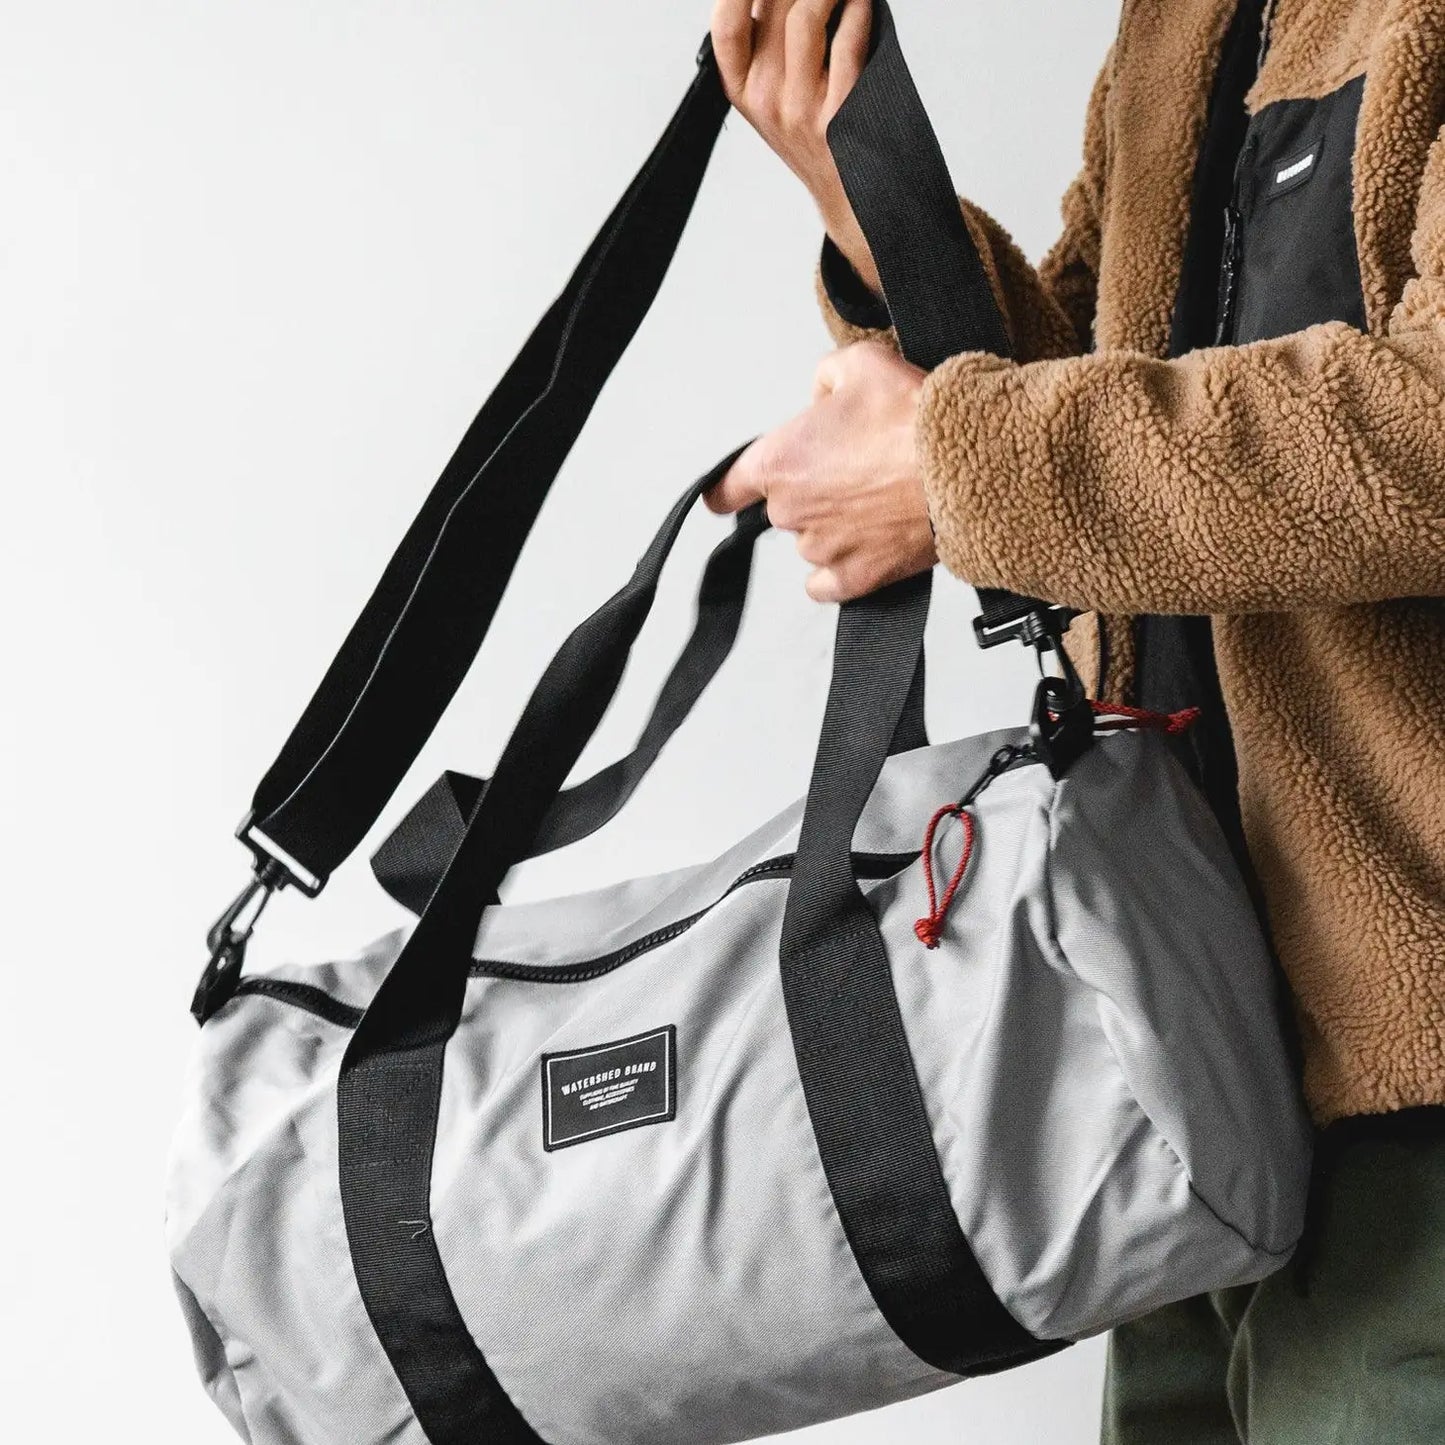 Watershed Recycled Duffle Bag - Grey